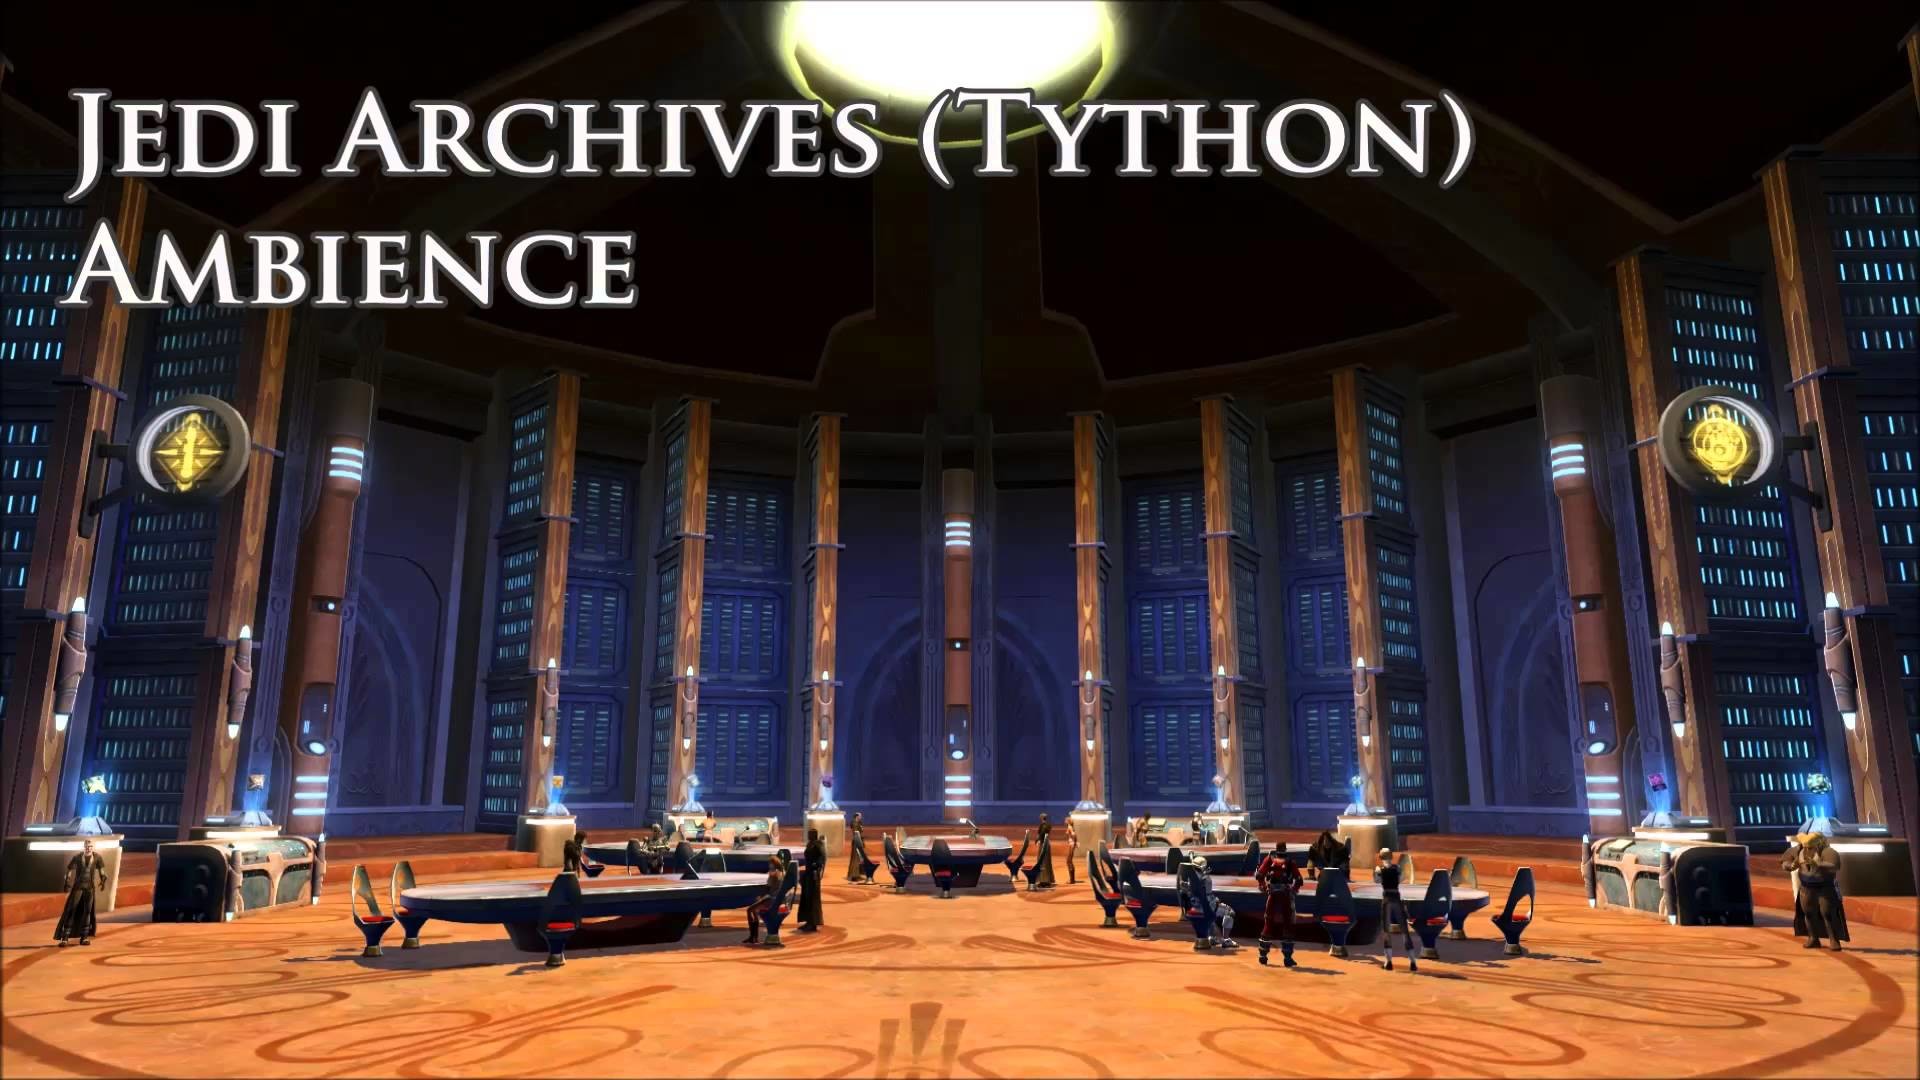 1920x1080 Jedi Temple Archives on Tython (1 hour) - Star Wars Background Ambience